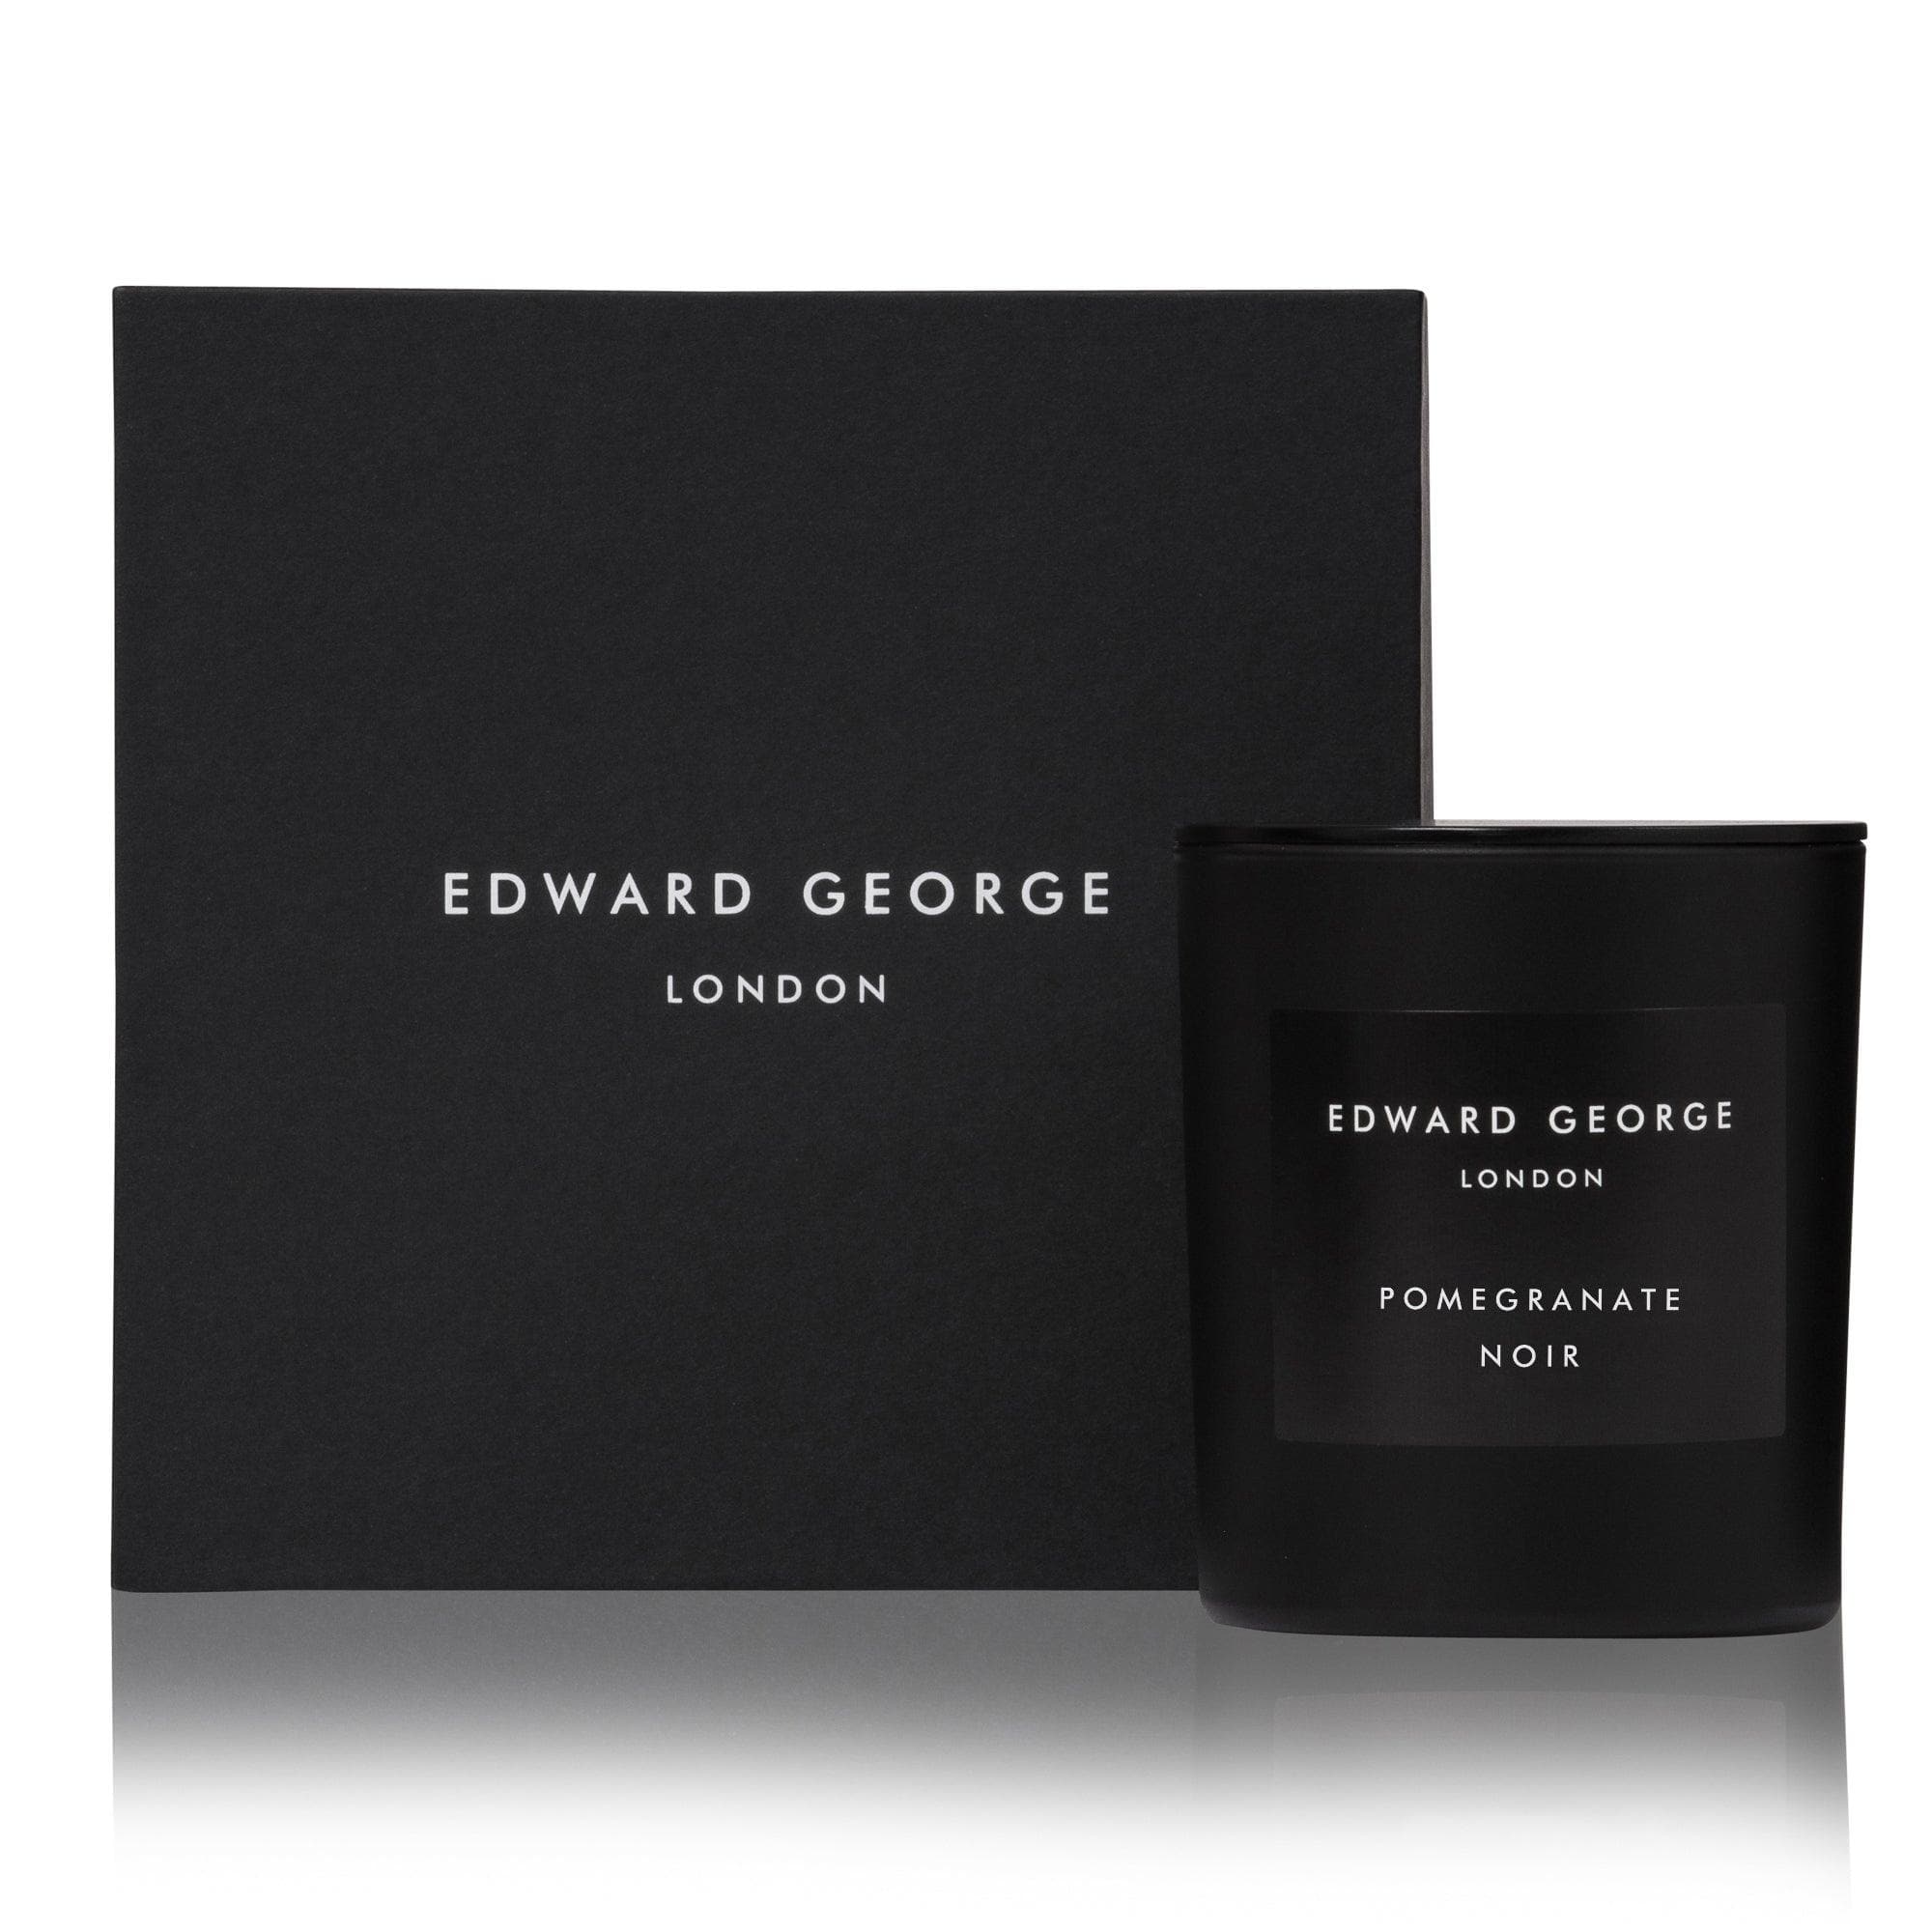 pomegranate noir candles home fragrance decor room living room edward george london luxury gift ritual scent set lid zinc alloy black wax best black scented candle women men small